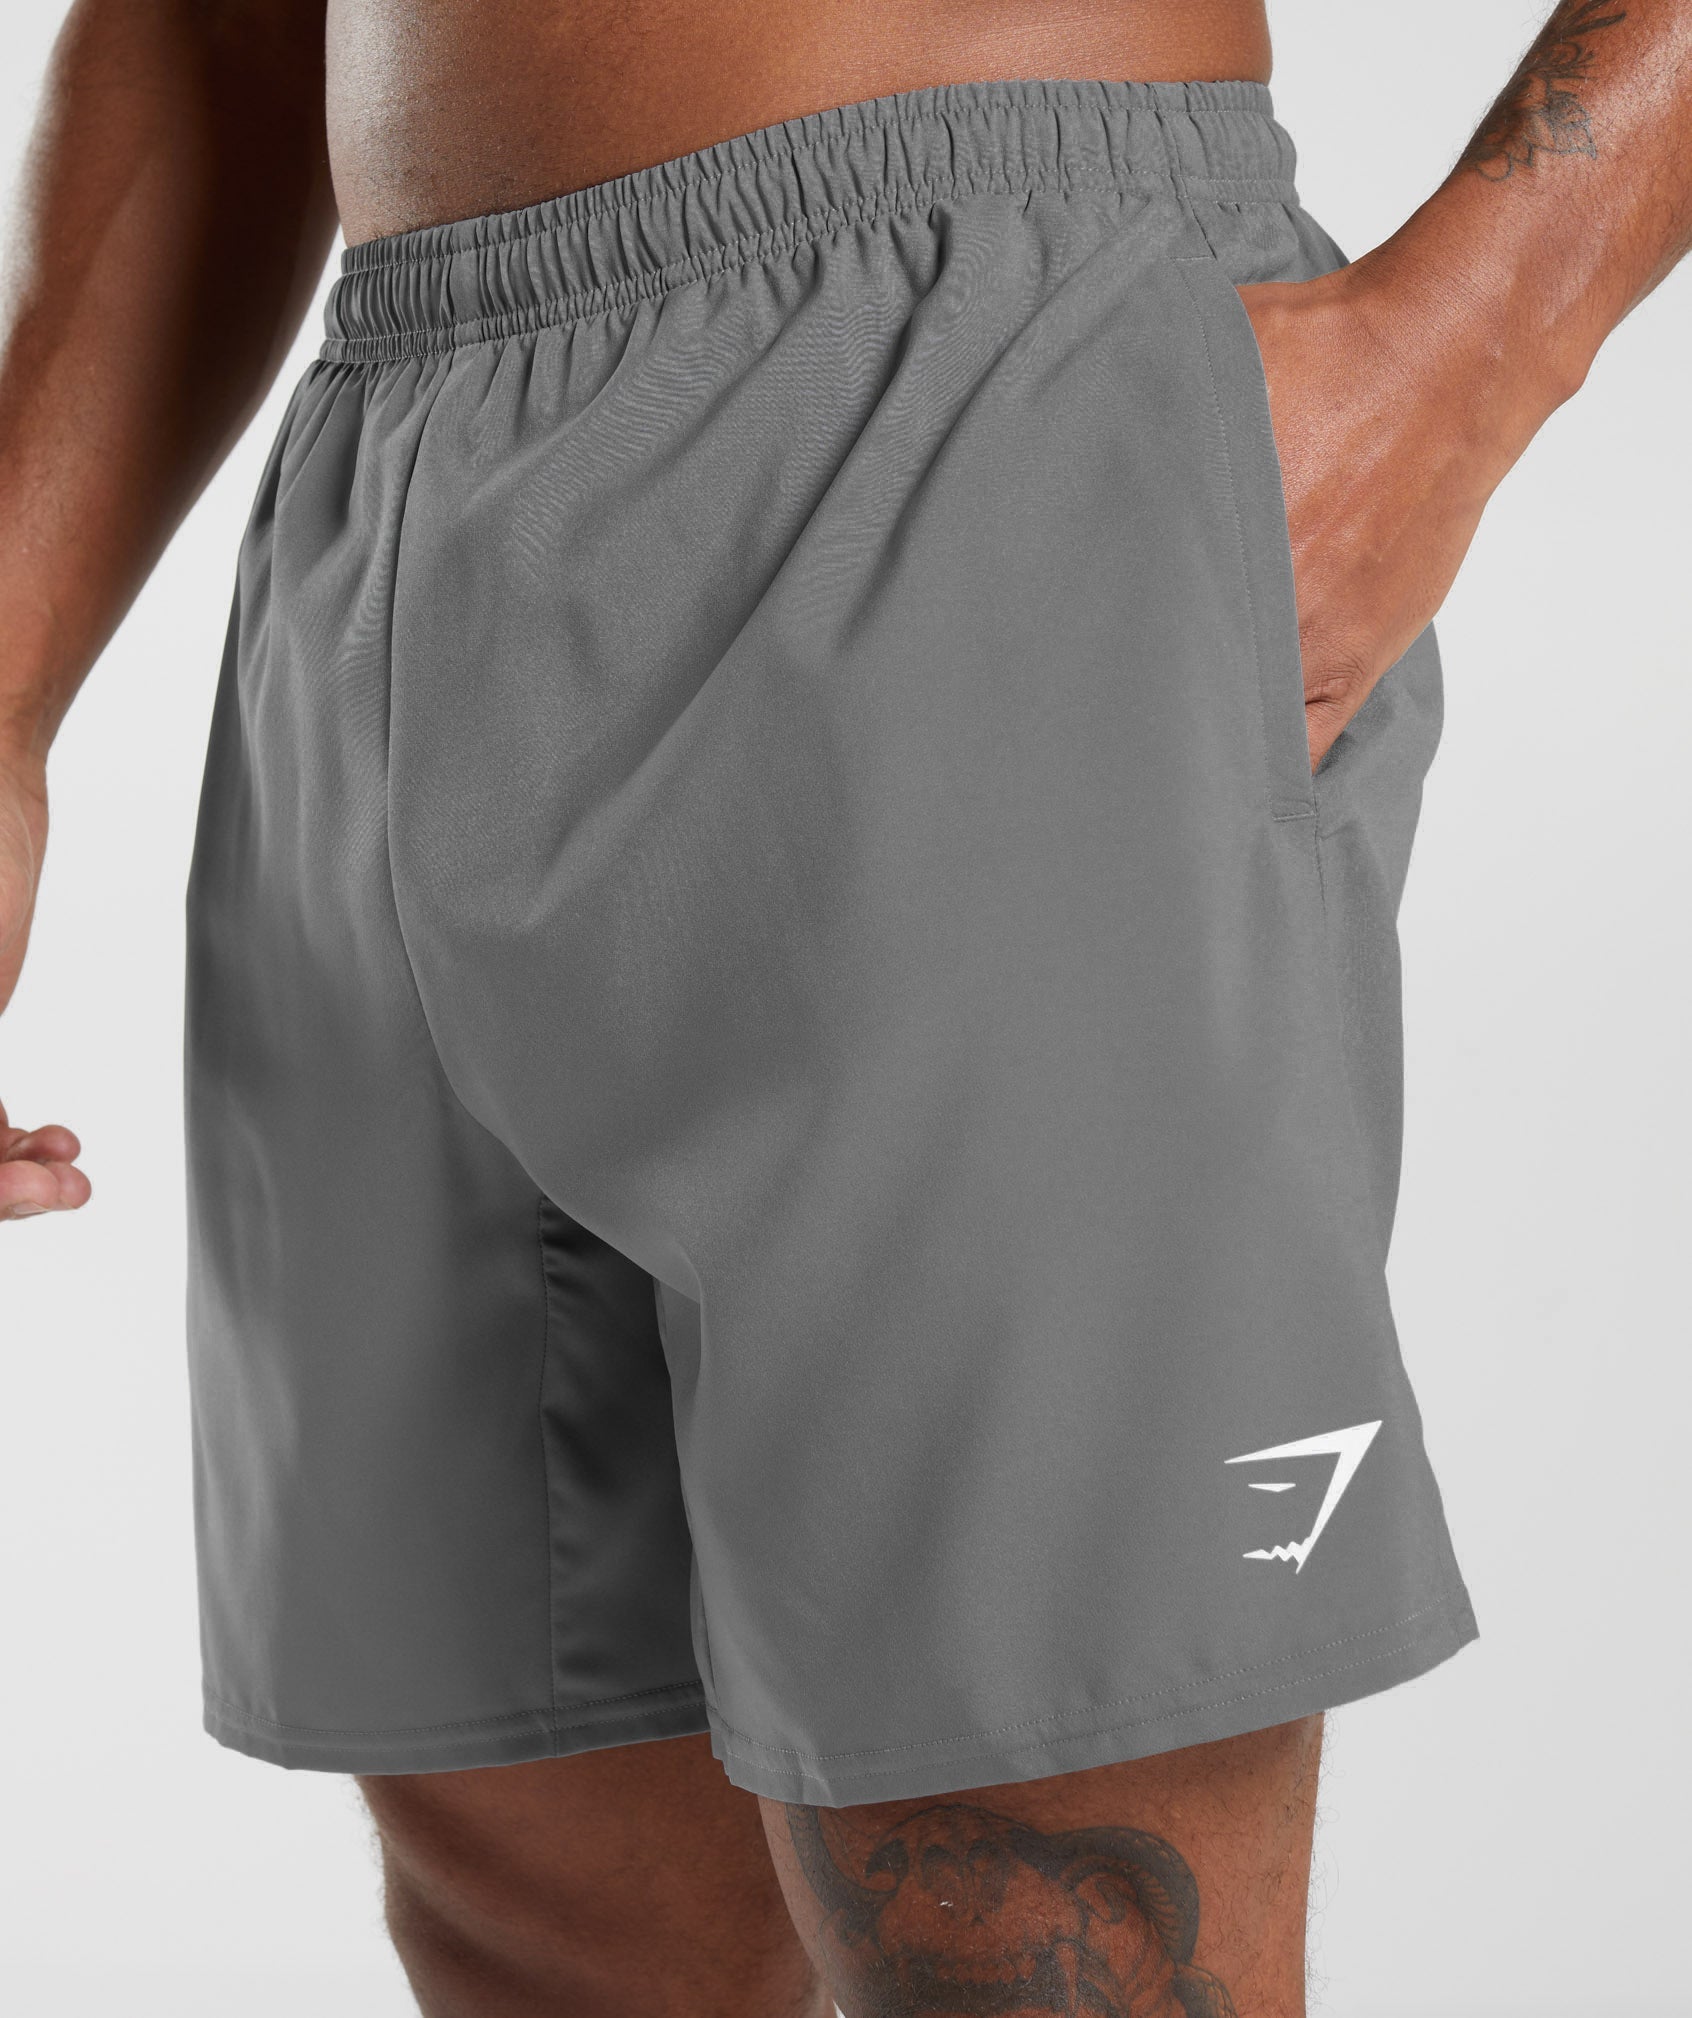 Arrival Shorts in Charcoal Grey